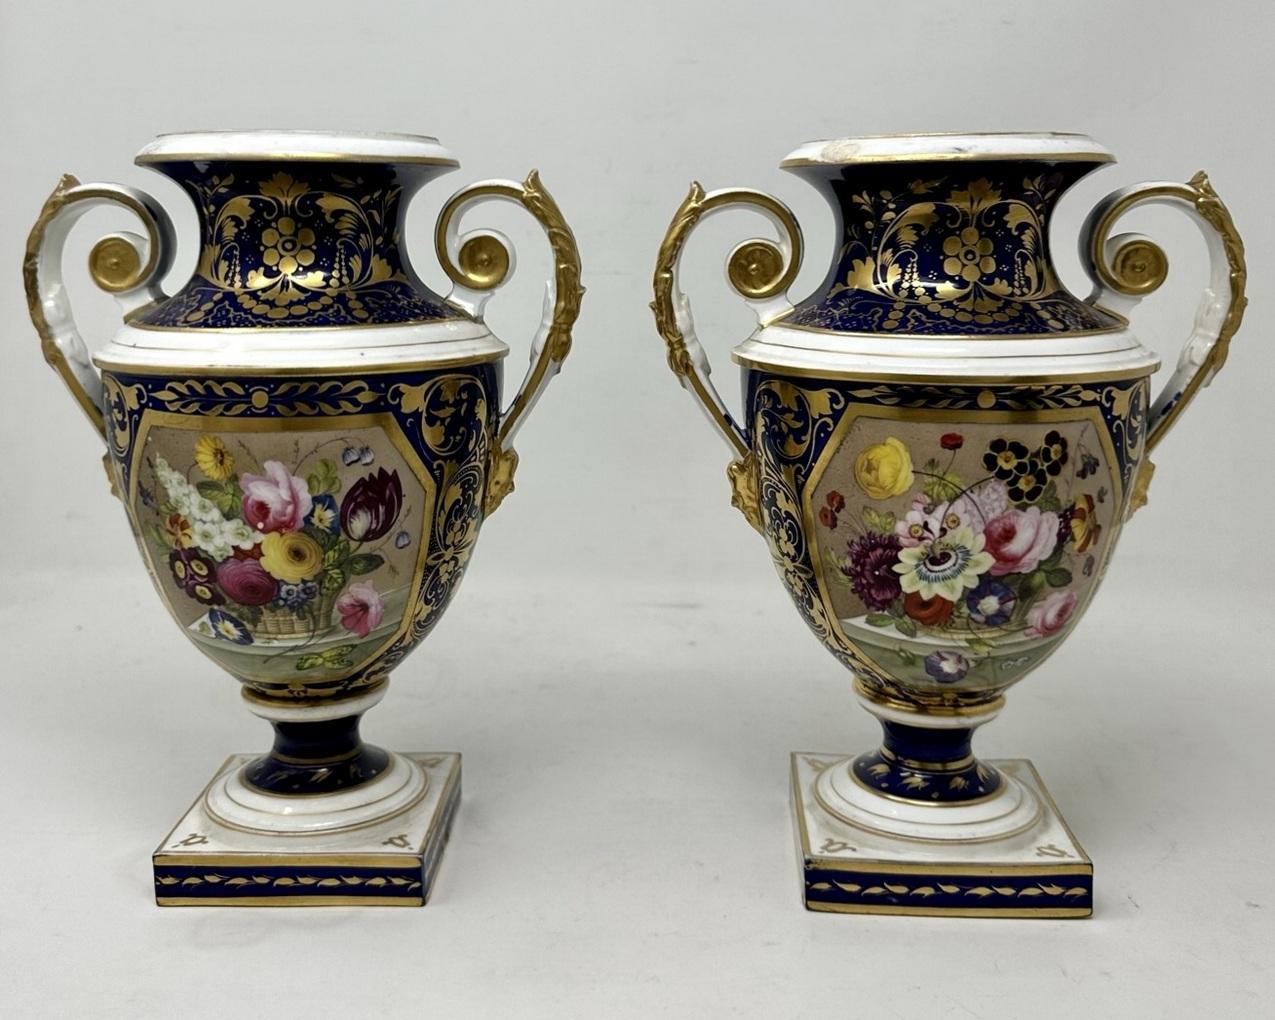 19th Century Antique Garniture English Royal Crown Derby Porcelain Vases by Thomas Steel 19C  For Sale